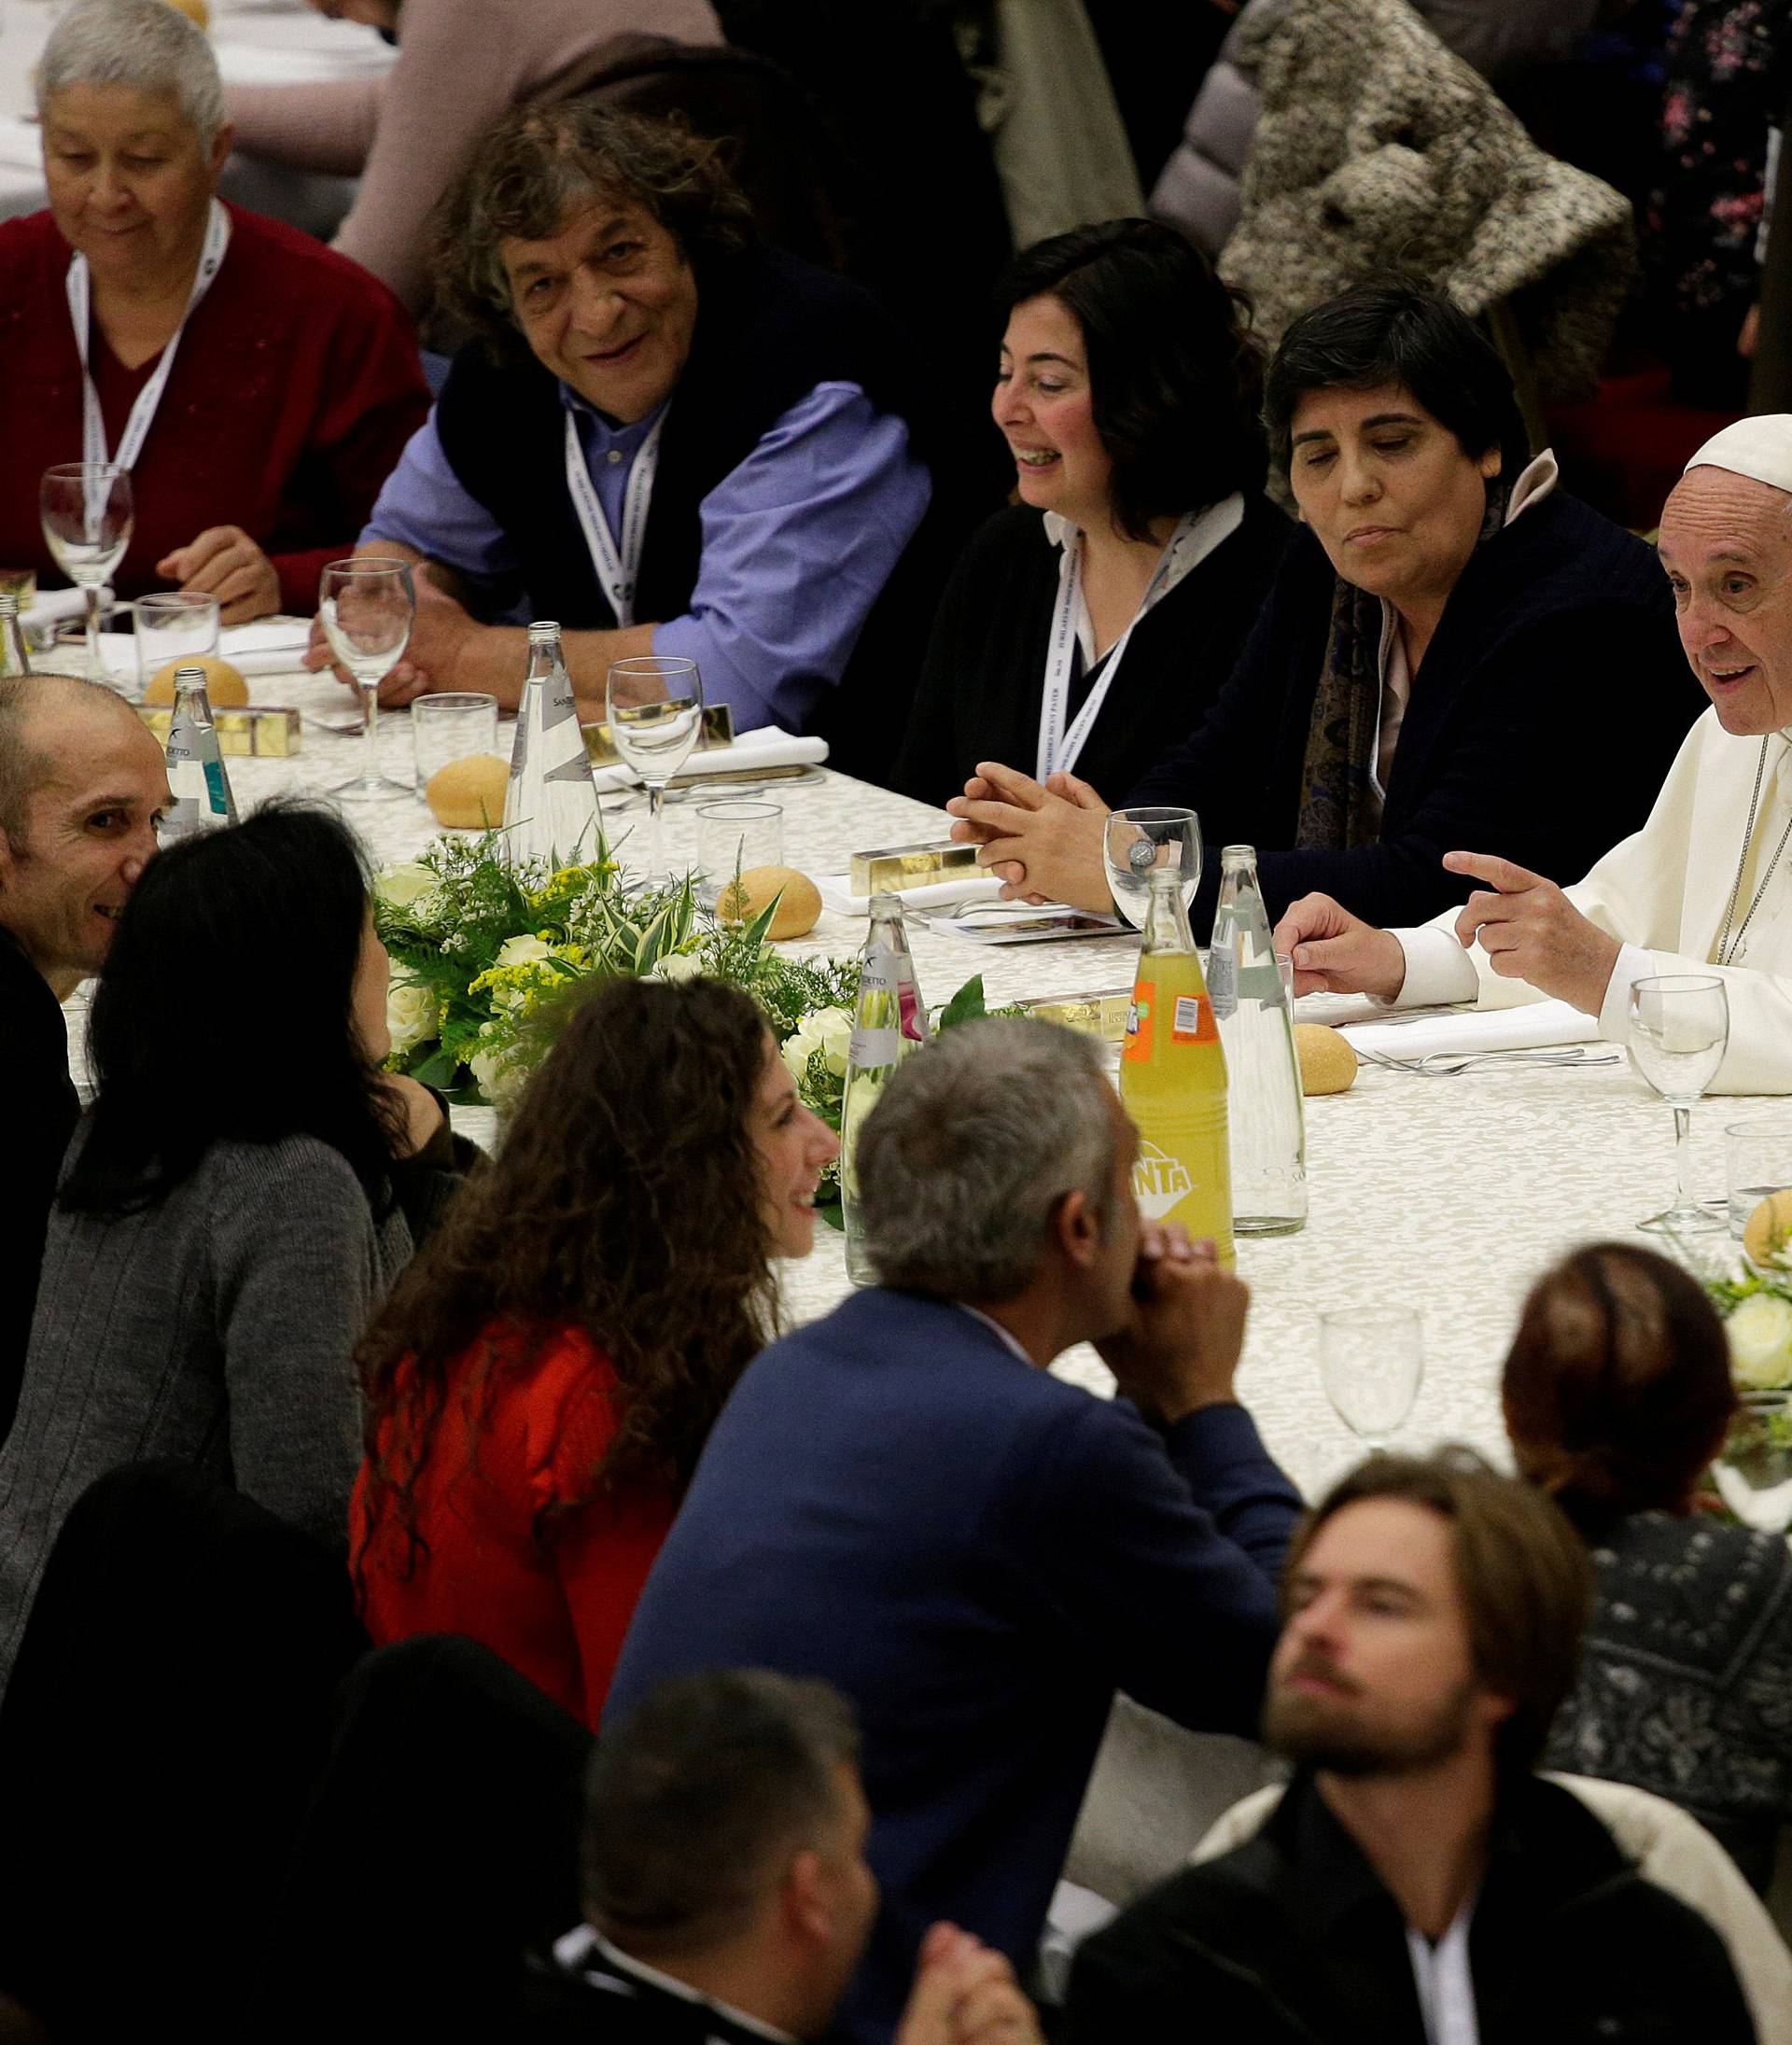 Pope Francis has lunch with the poor following a special mass to mark the new World Day of the Poor in Paul VI's hall at the Vatican